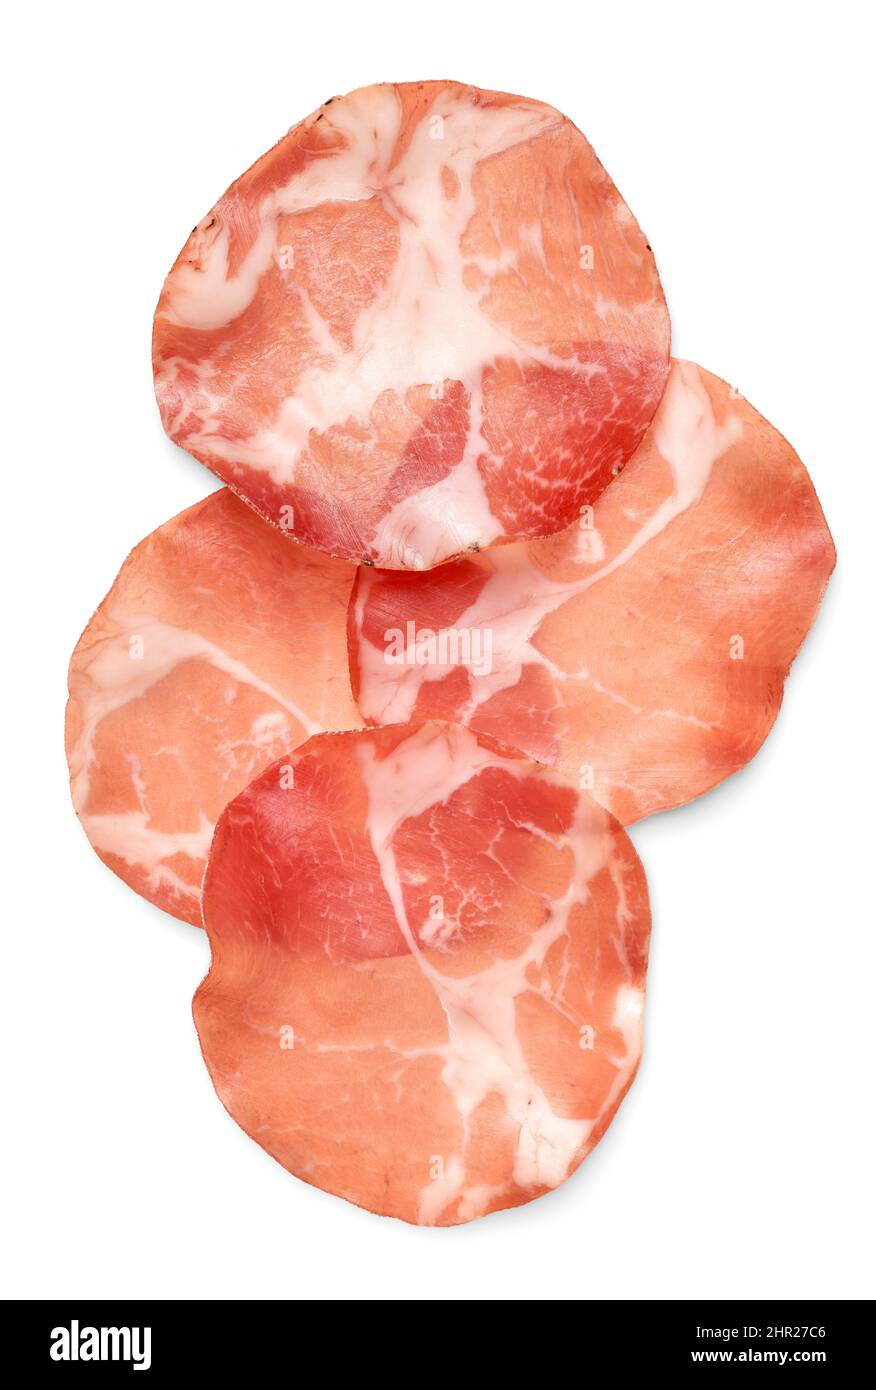 Food and drink: thin slices of cured pork meat, isolated on white background Stock Photo